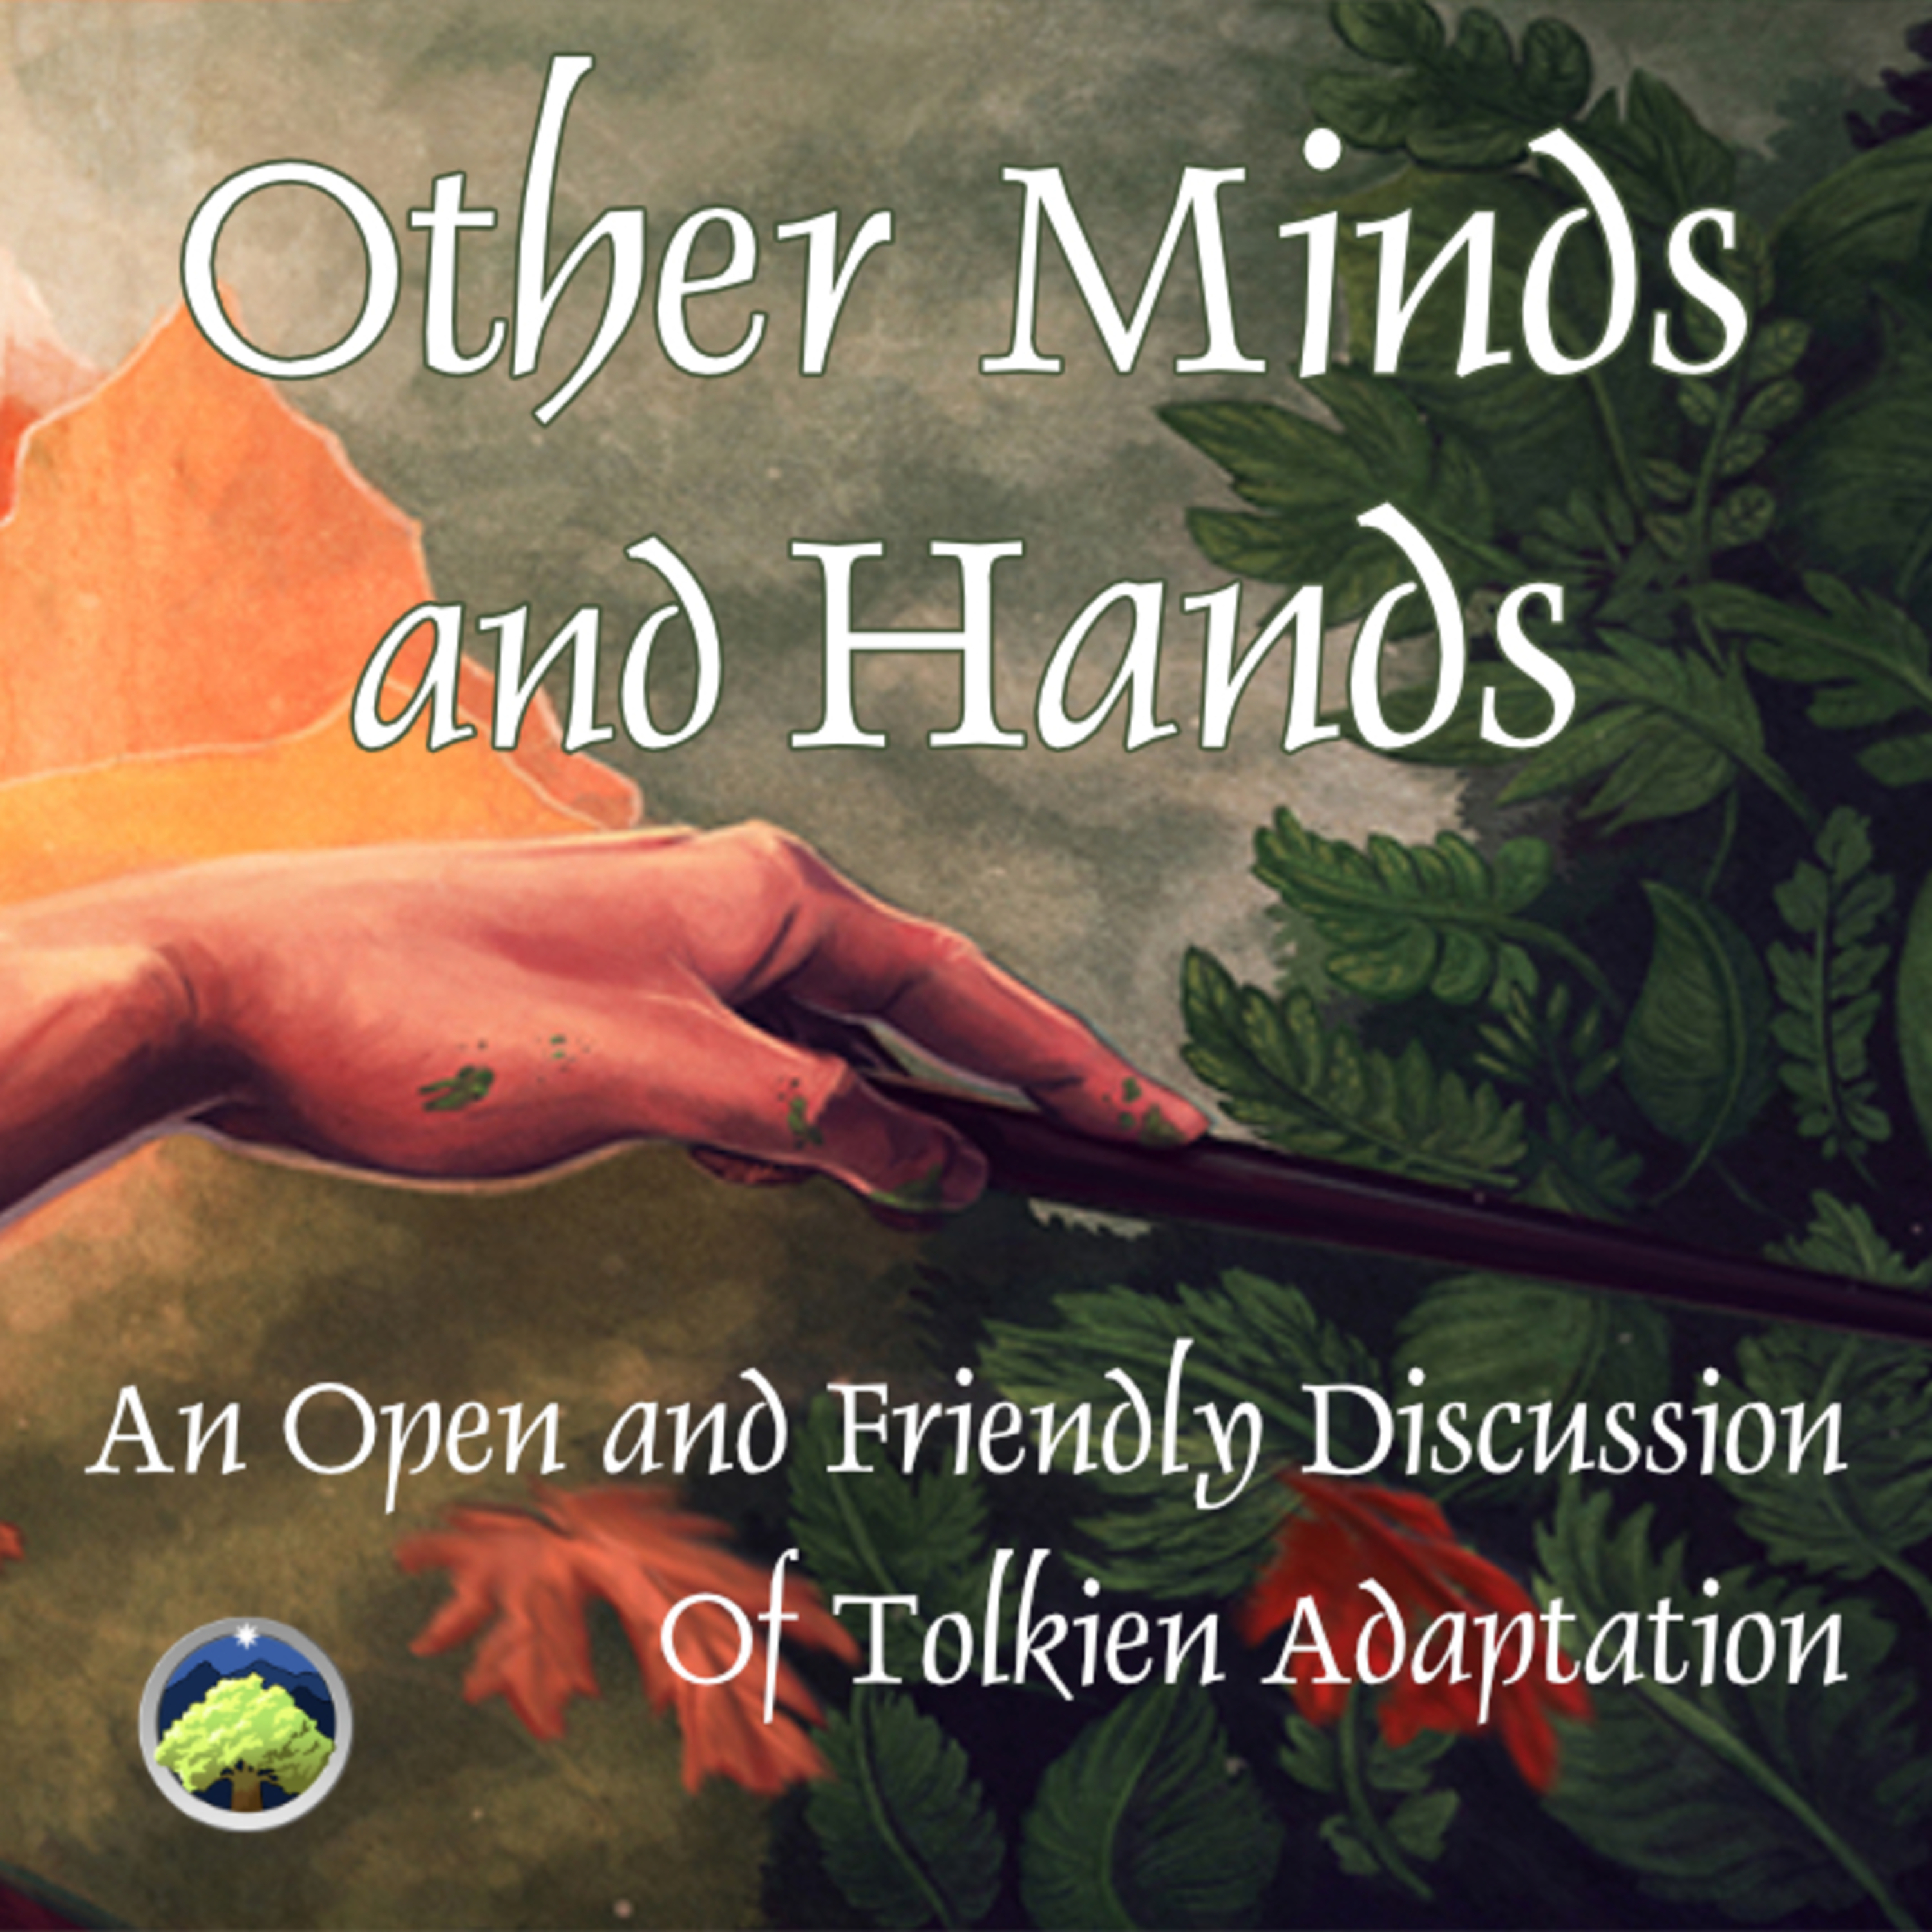 470: Other Minds and Hands, Episode 6